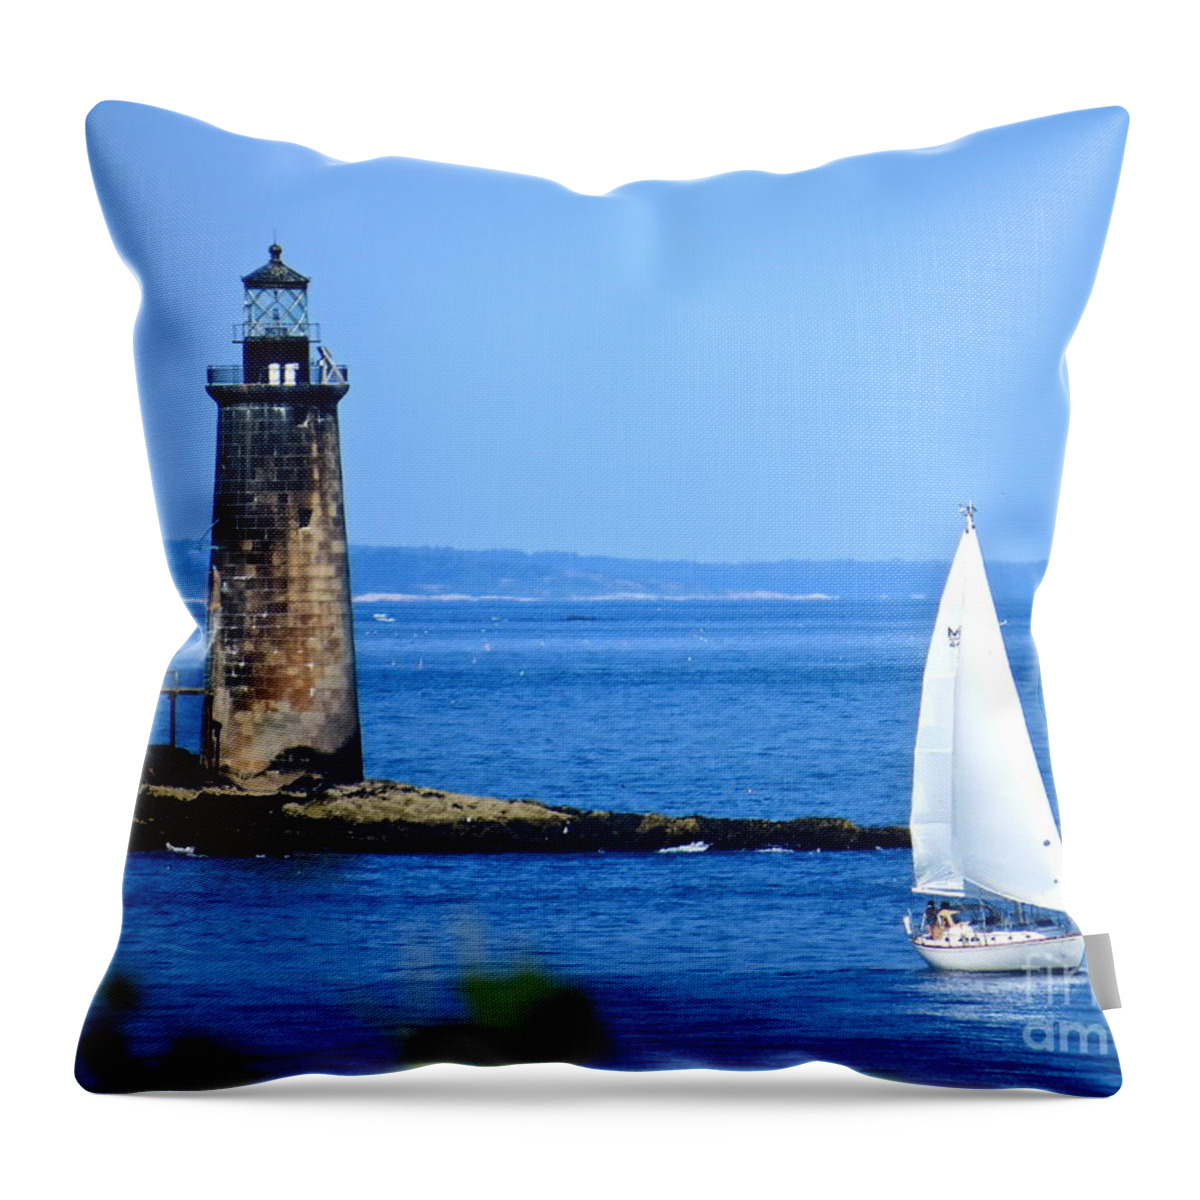 Ram Island Ledge Light Throw Pillow featuring the photograph Sailing By Ram Island Light #1 by Nancy Patterson